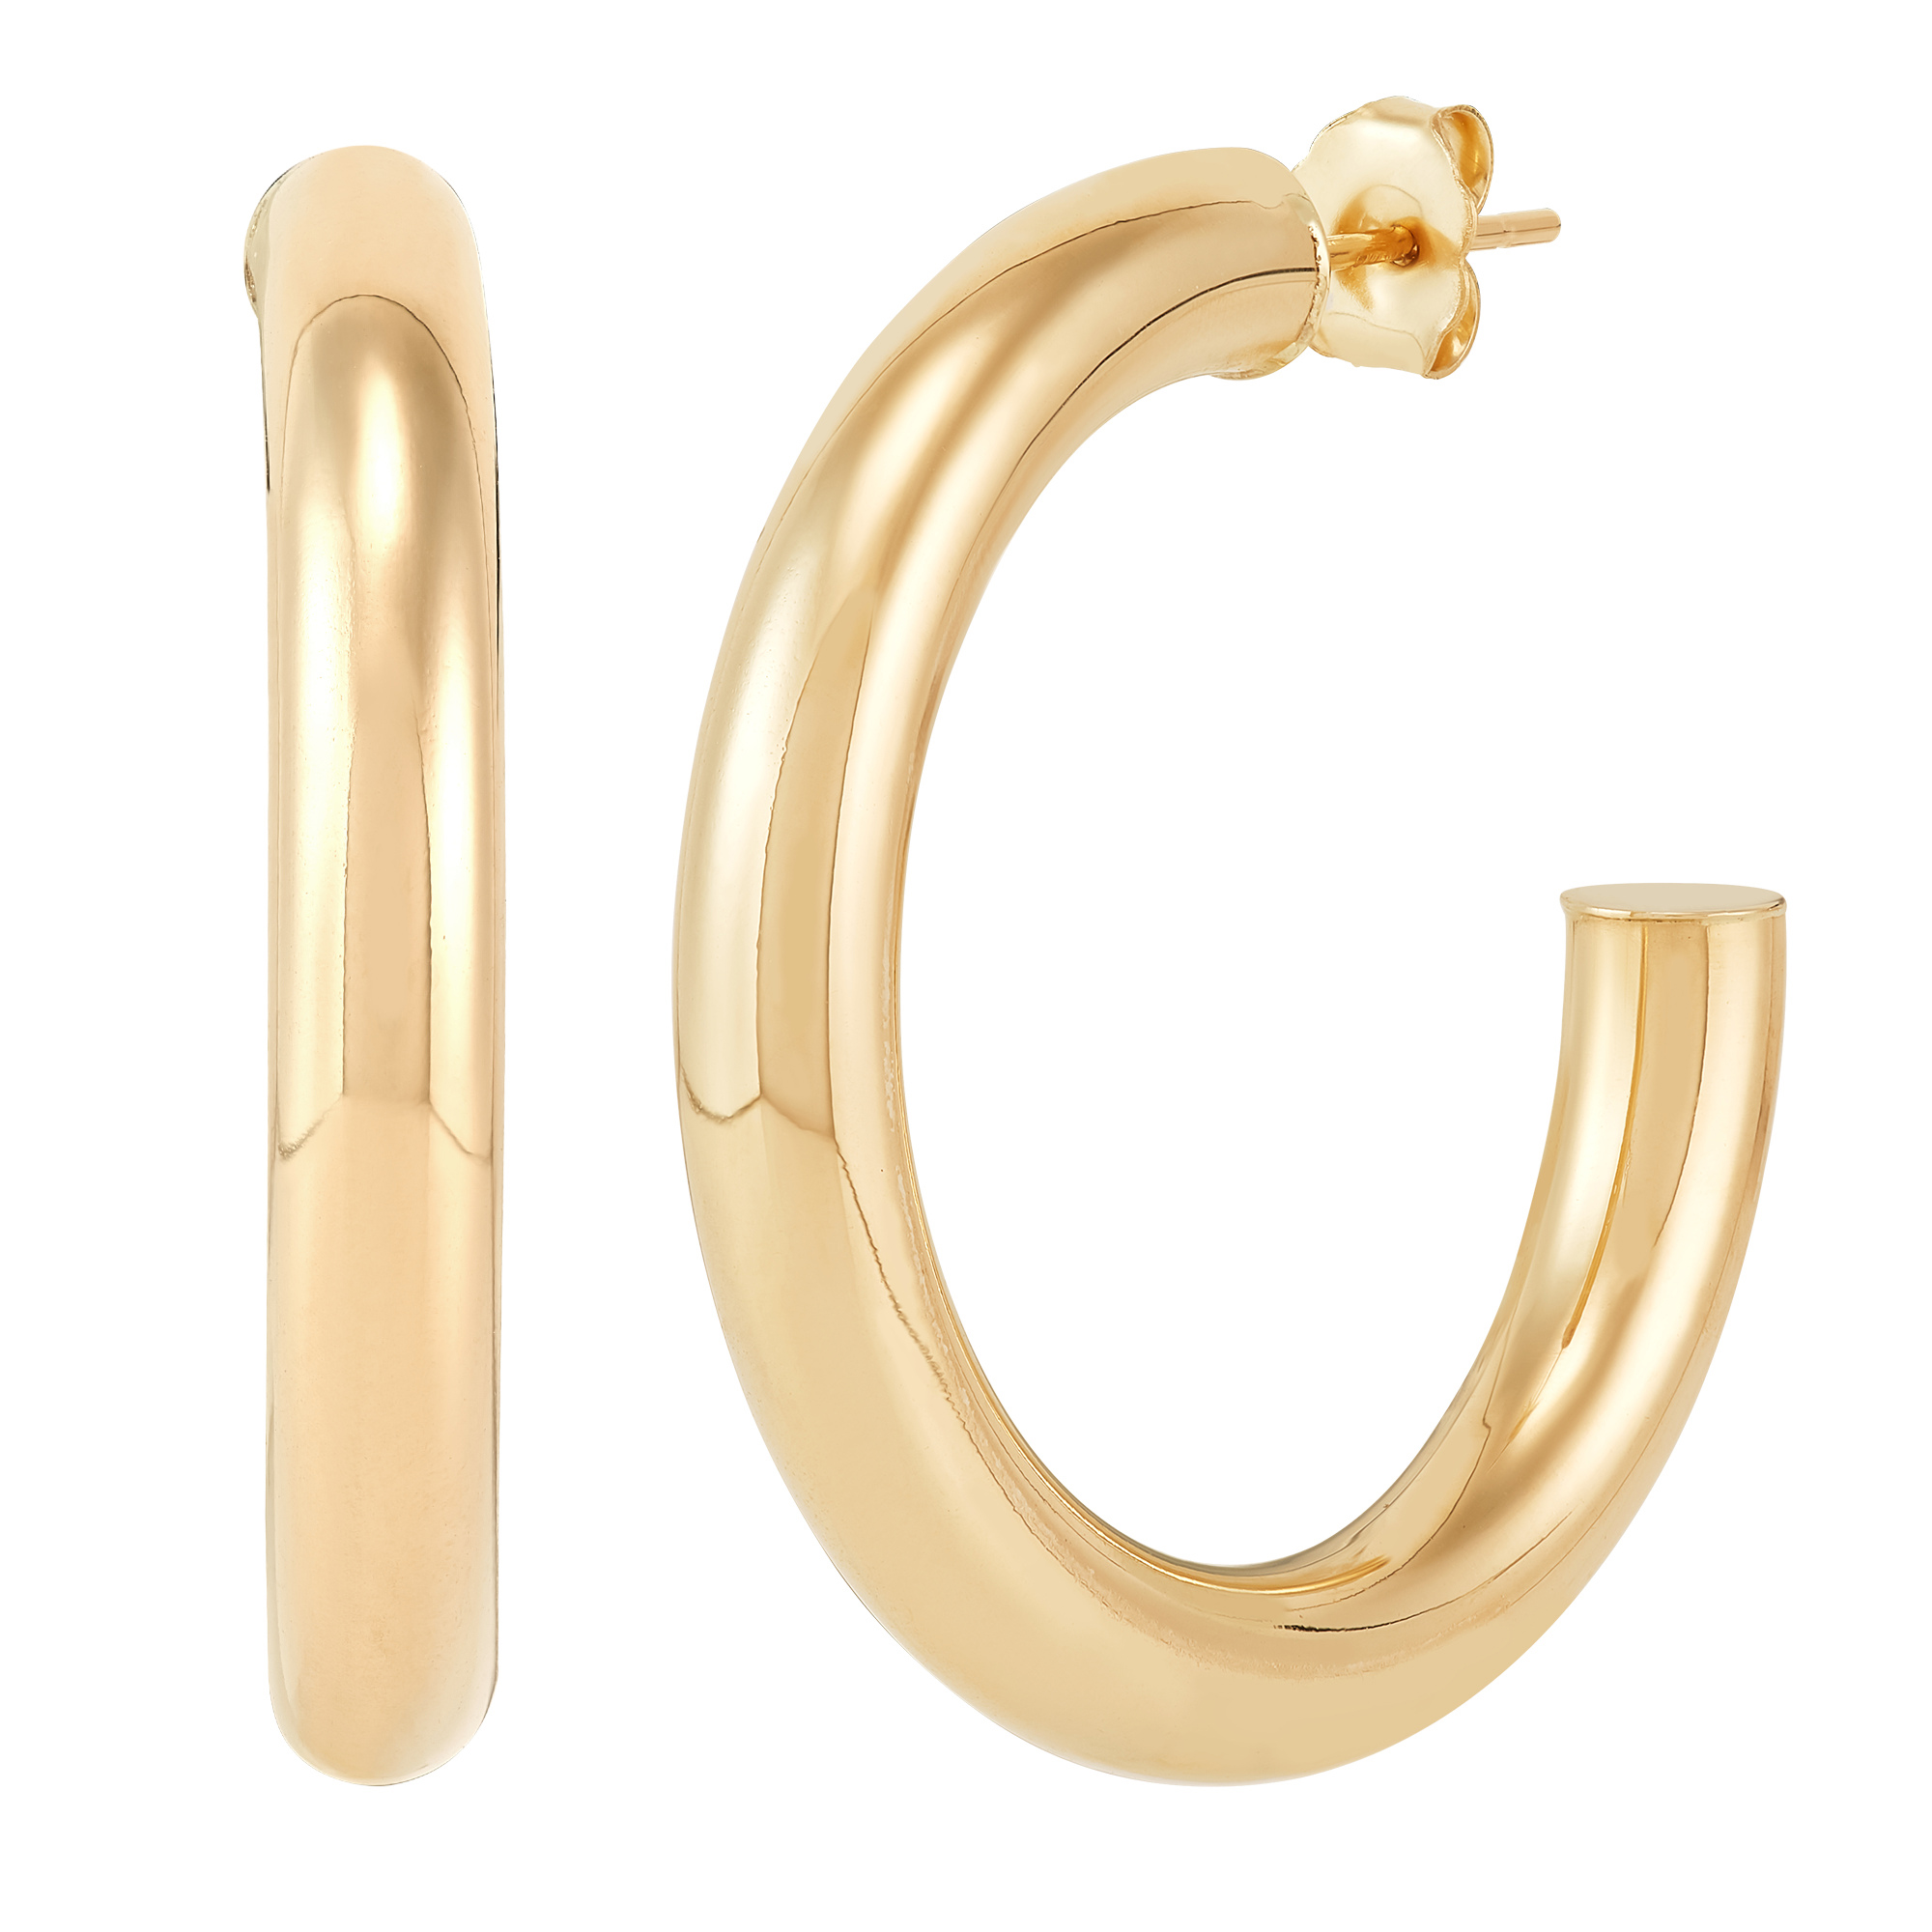 Polished Round Open Hoop Earrings in 14K Yellow Gold